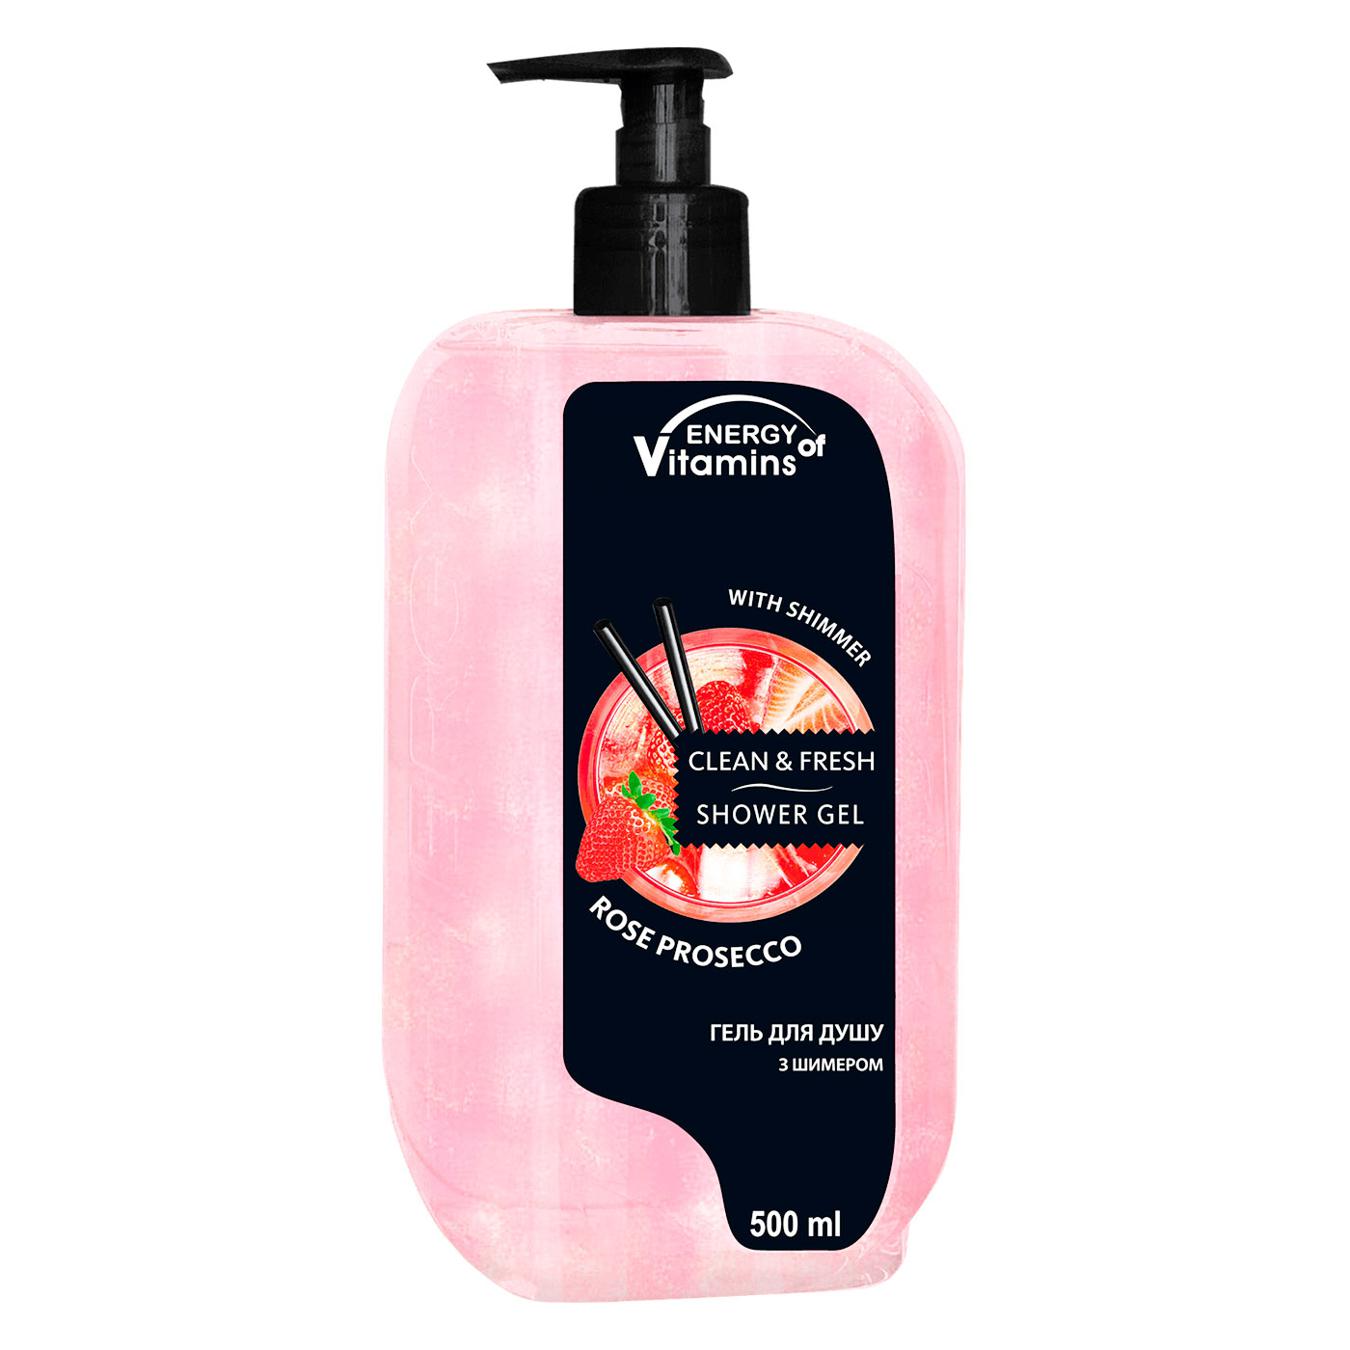 Energy of vitamin shower gel with rose prosecco shimmer 500 ml